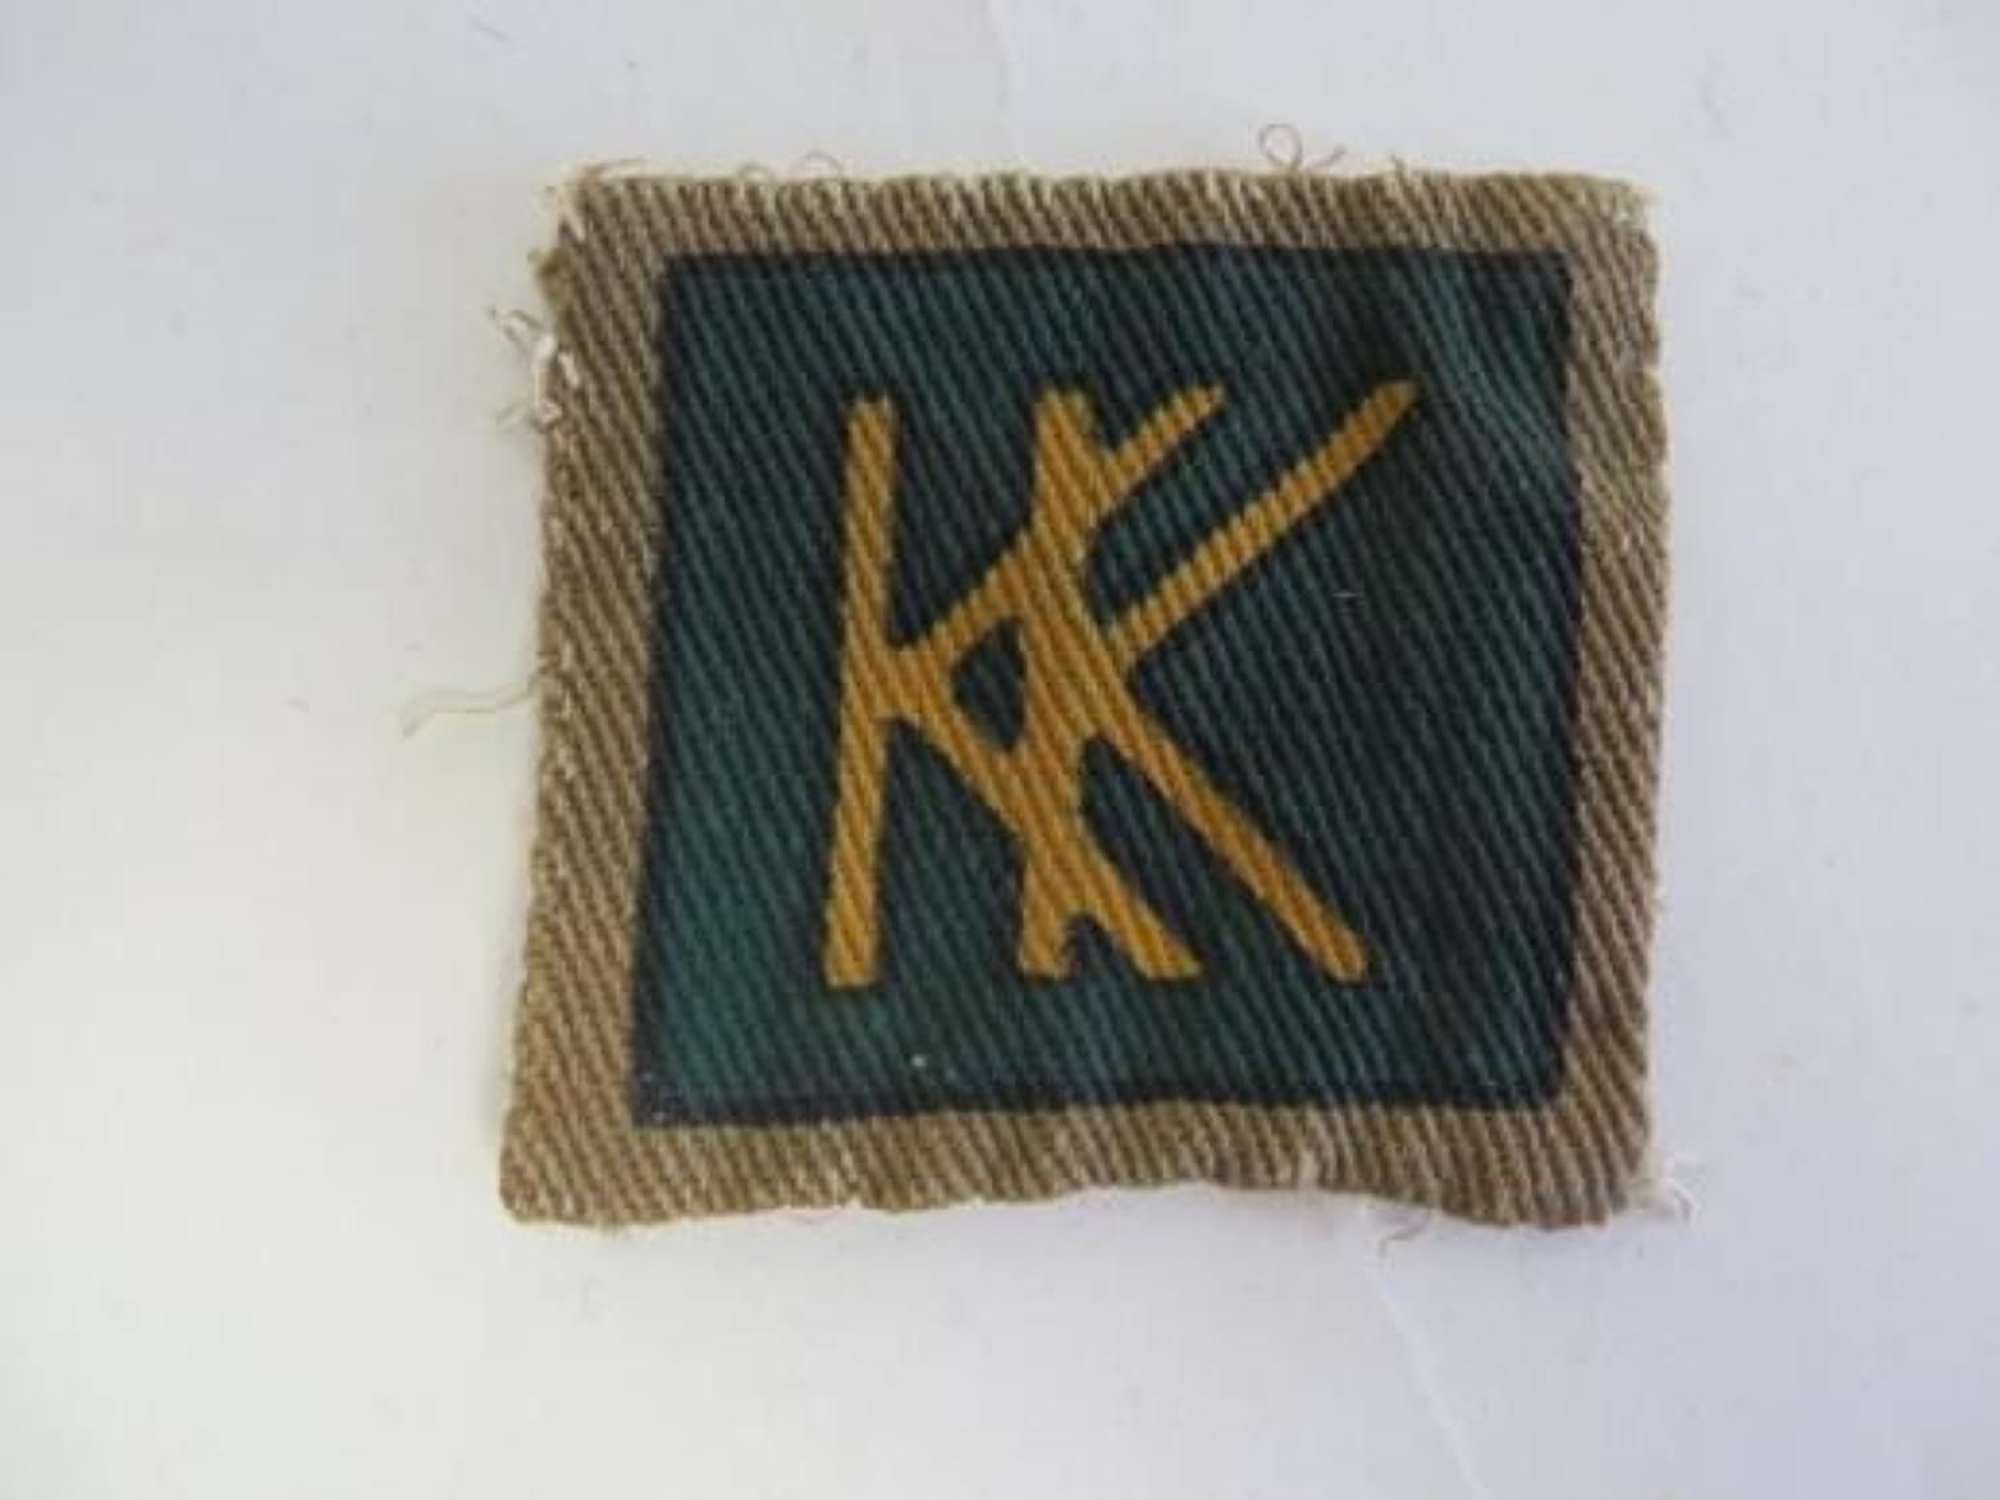 49th Independent Infantry Brigade Formation badge